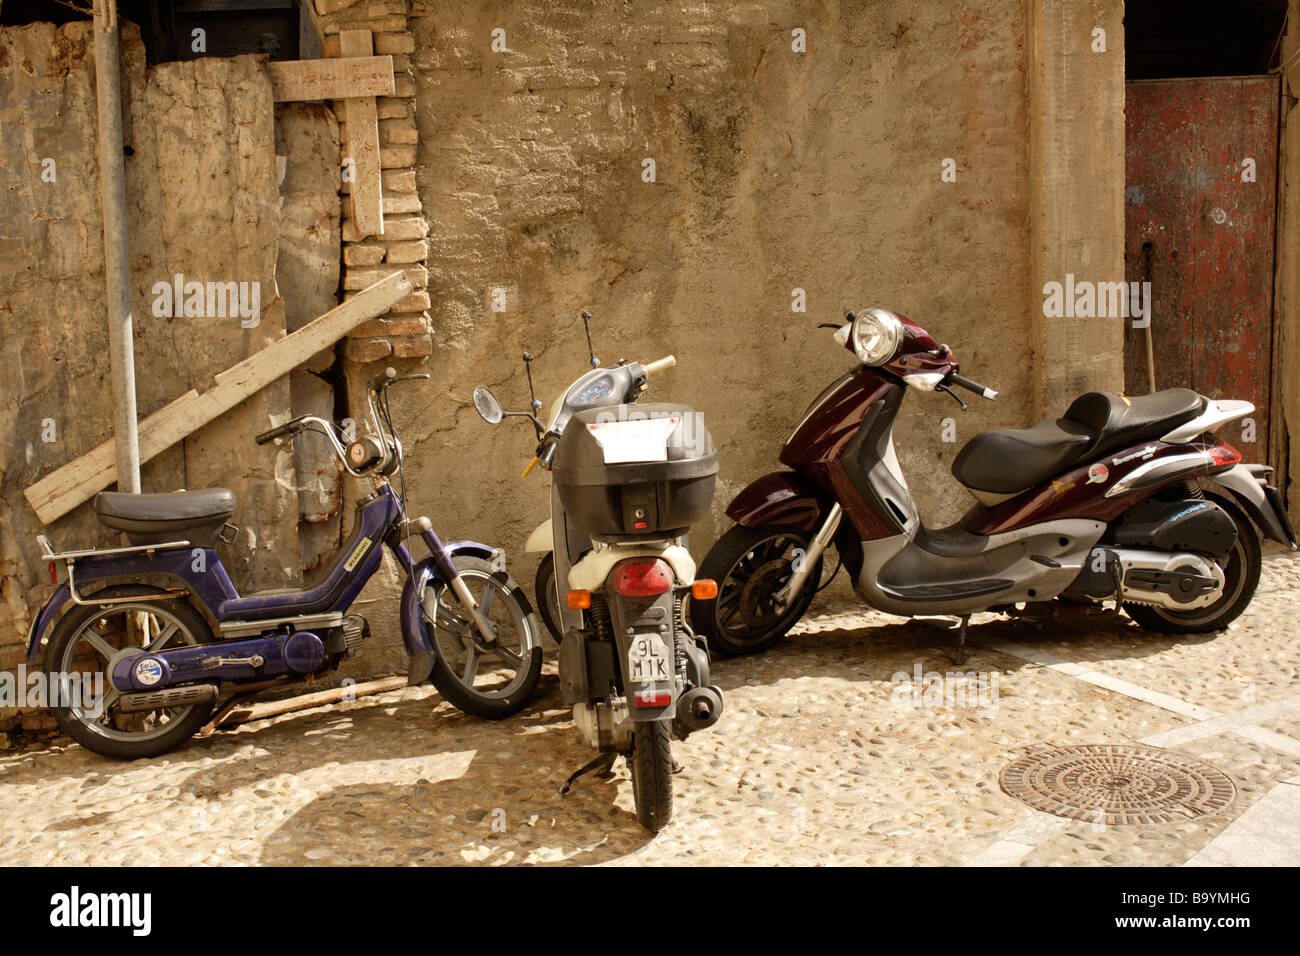 motorcycles in Italy Stock Photo